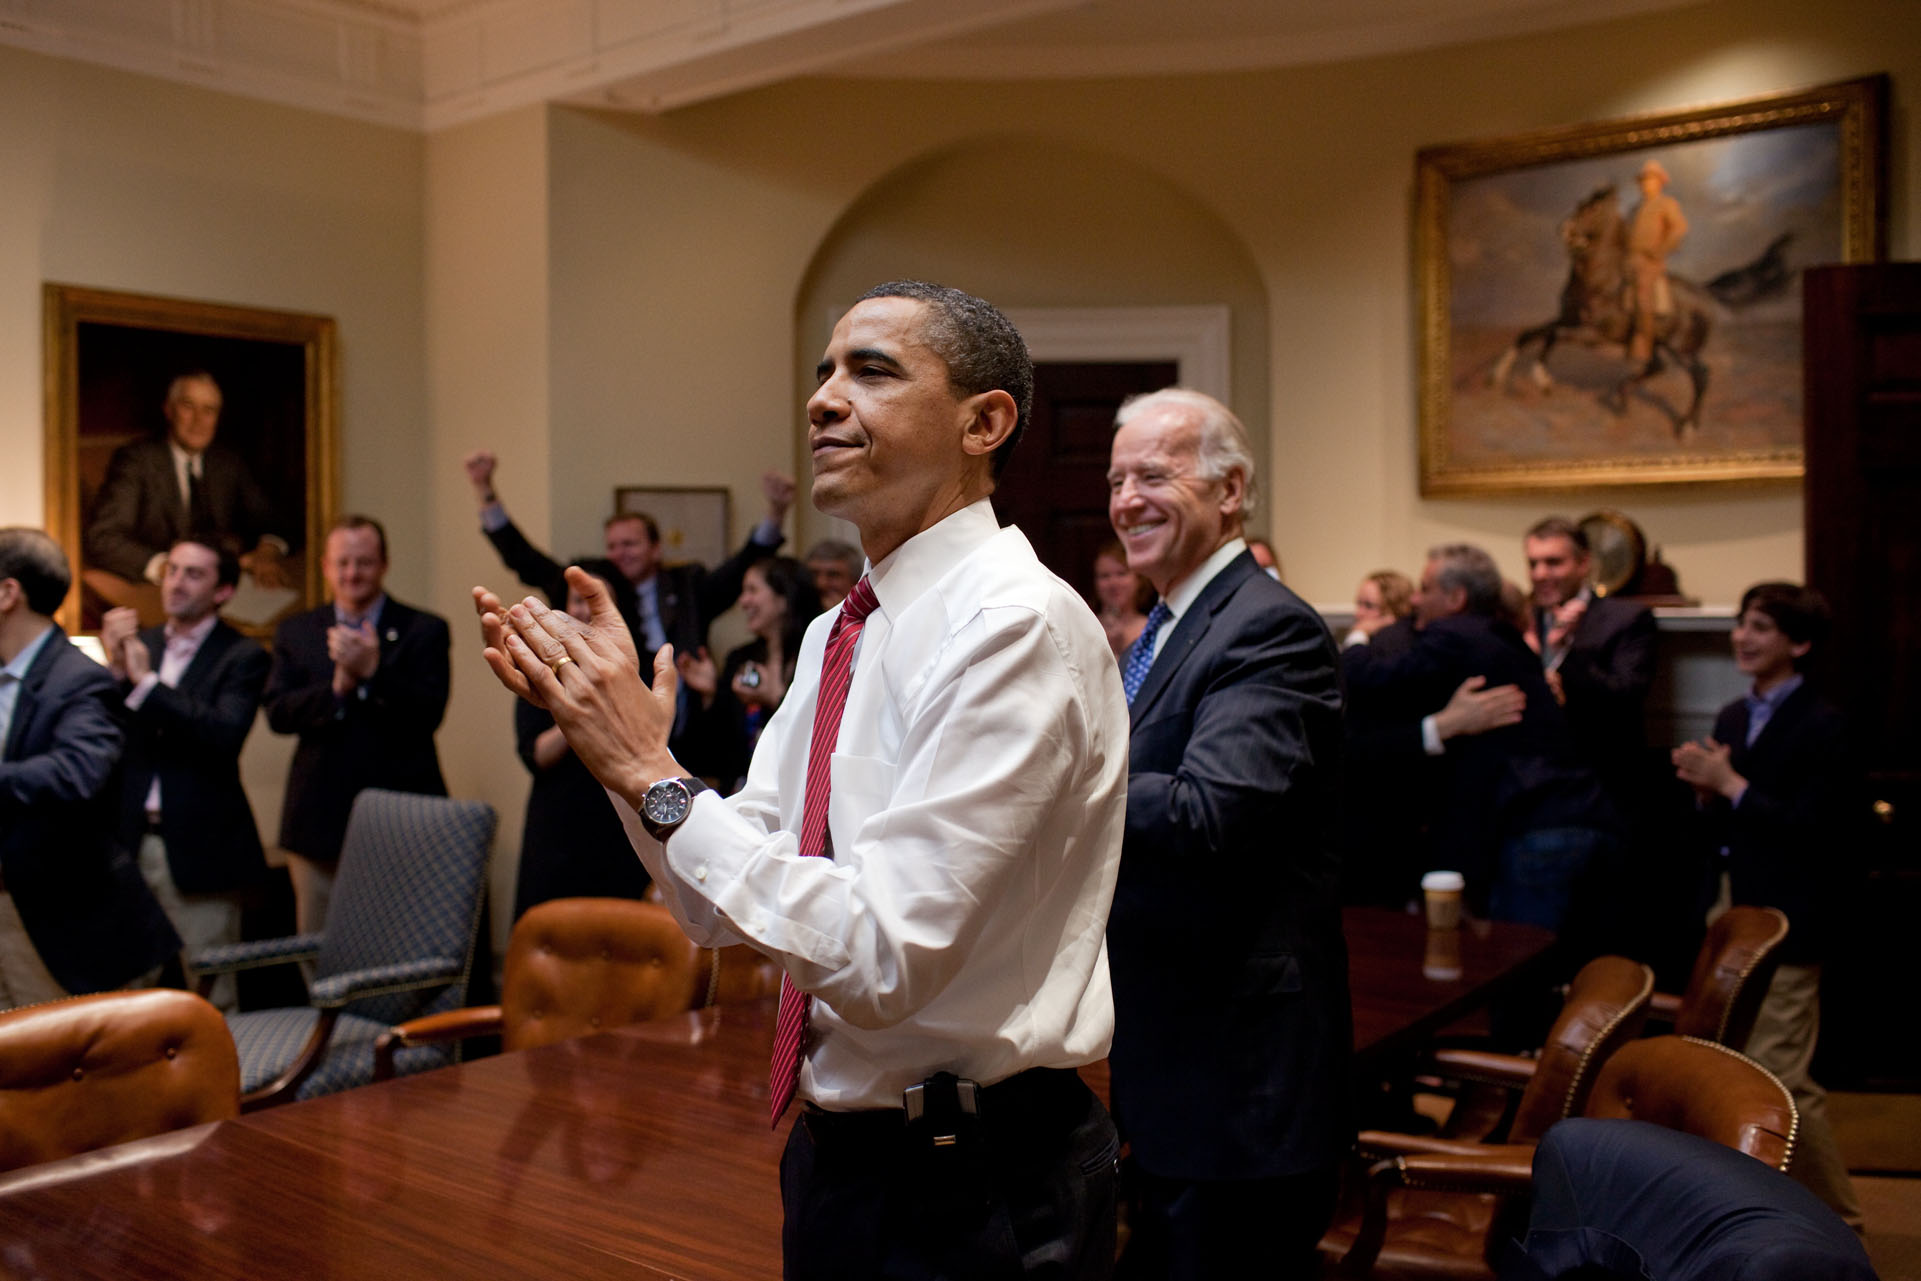 The President Celebrates Alongside The Vice President and Staff as Health Reform Passes